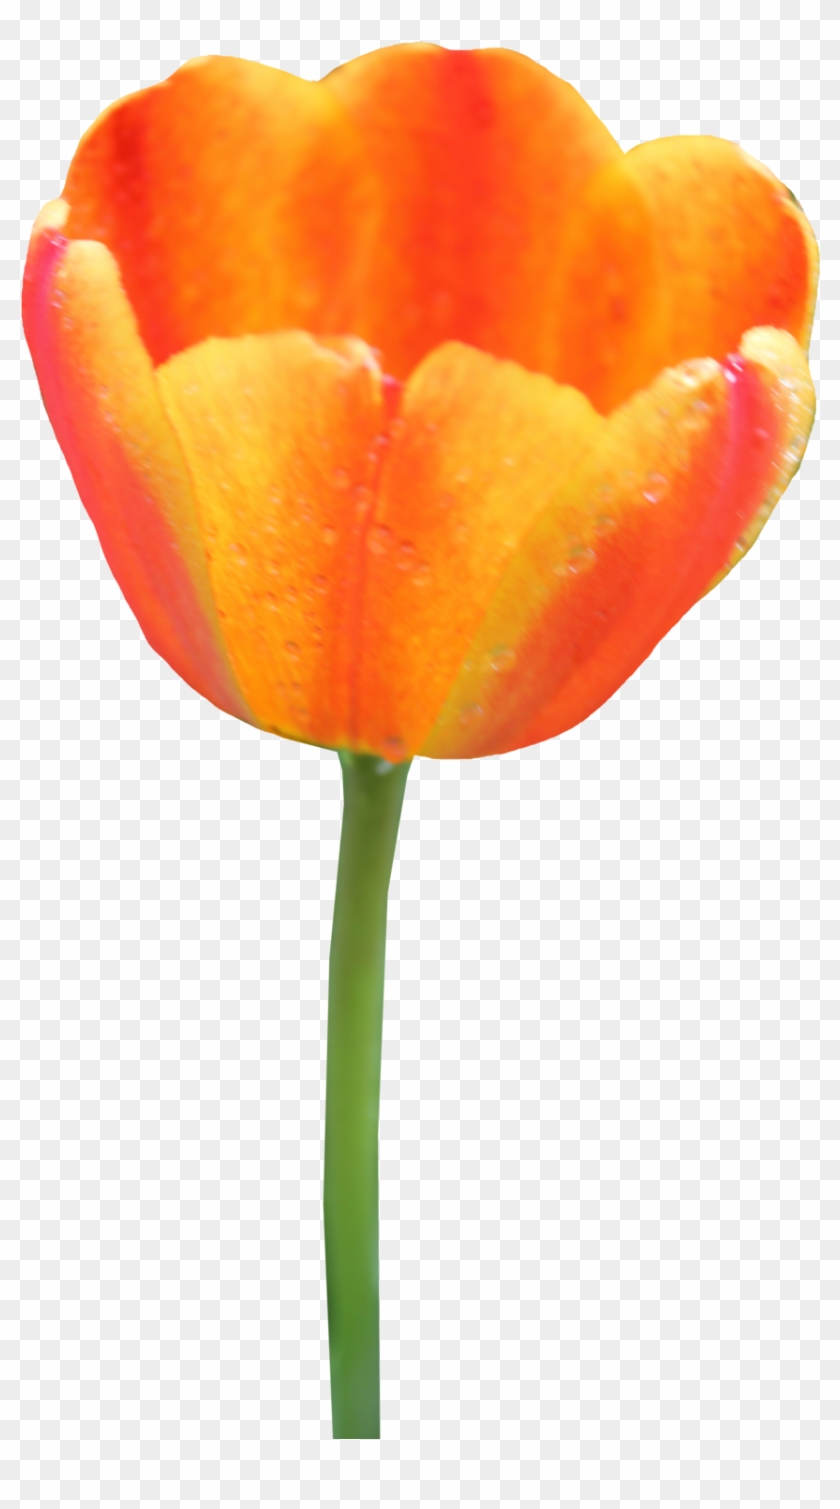 Tulip Png Image - Portable Network Graphics #292331